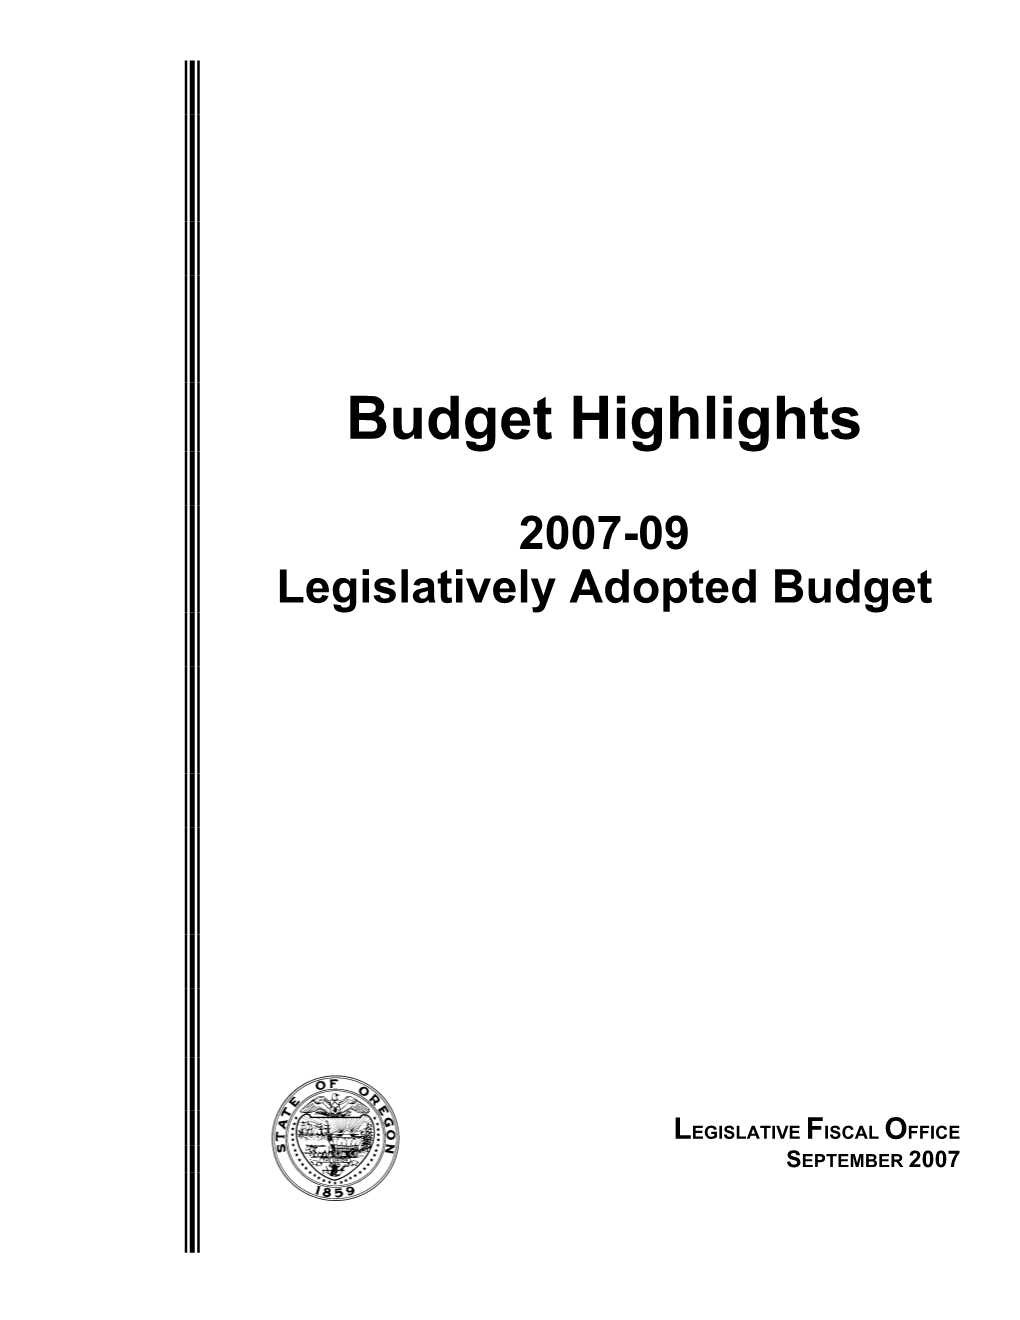 Highlights of the 2007-09 Legislatively Adopted Budget